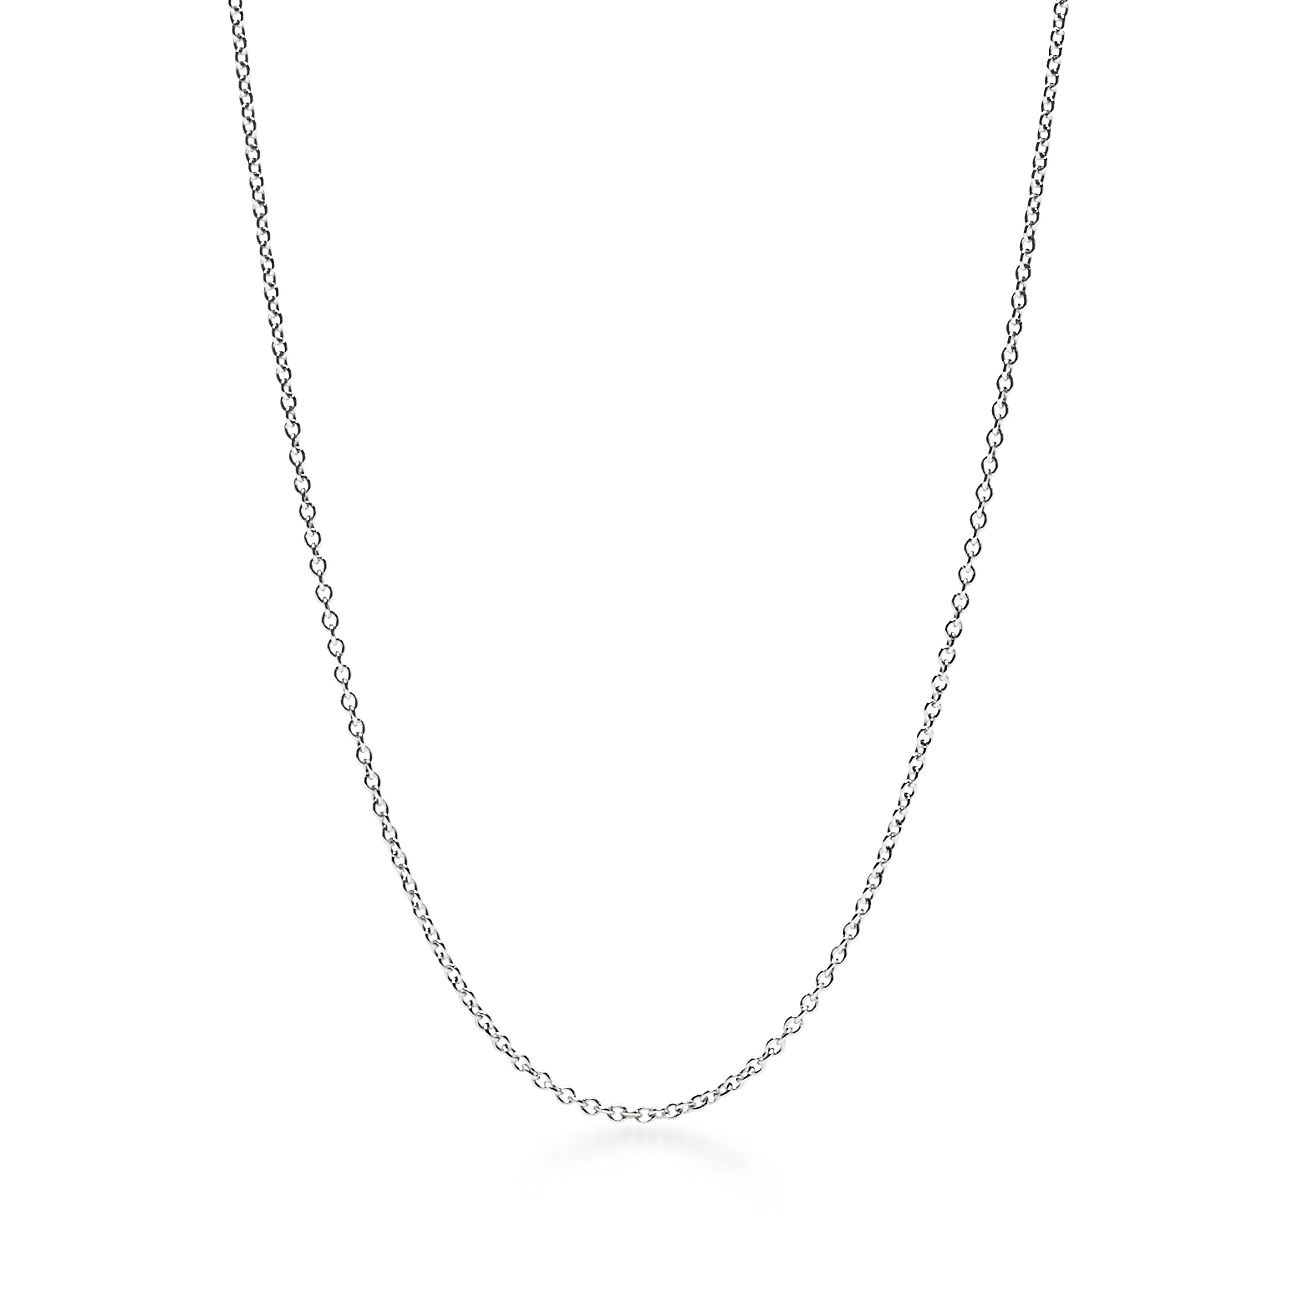 18k white gold chain 4mm tube rounded drop link 60cm 24